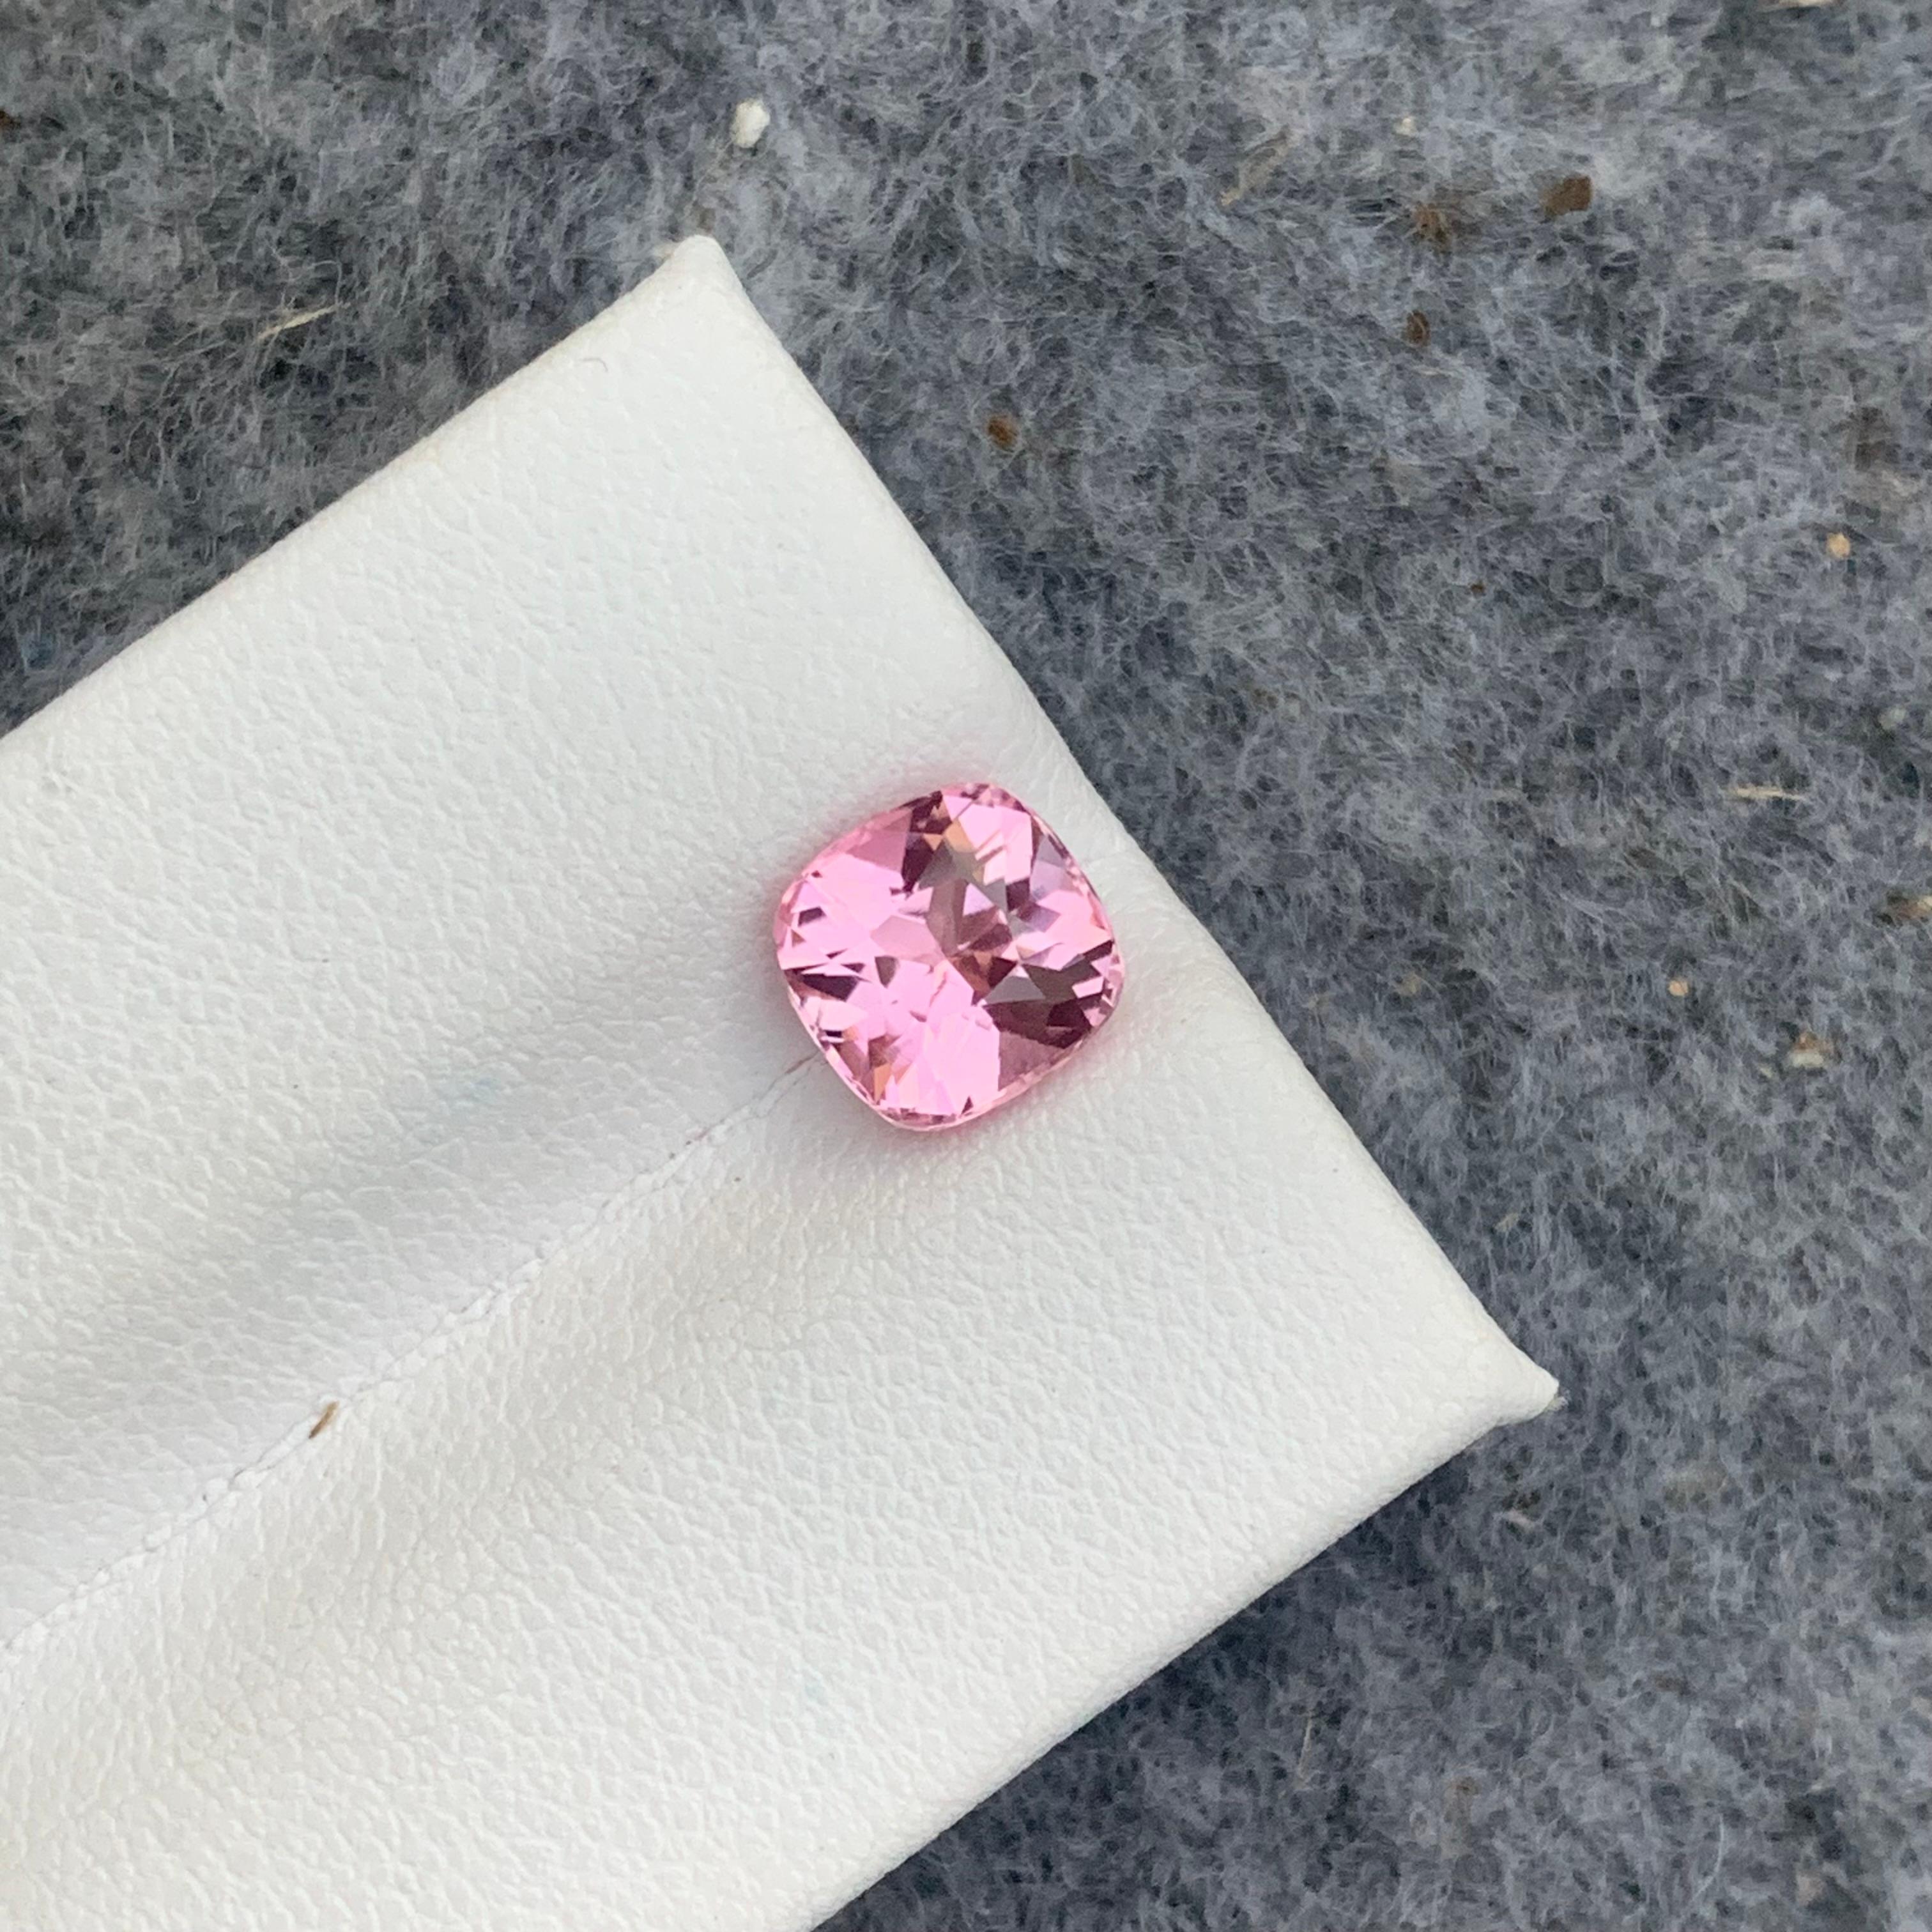 Cushion Cut Exceptional 2.0 Carat Natural Loose Baby Pink Tourmaline from Afghan Mine